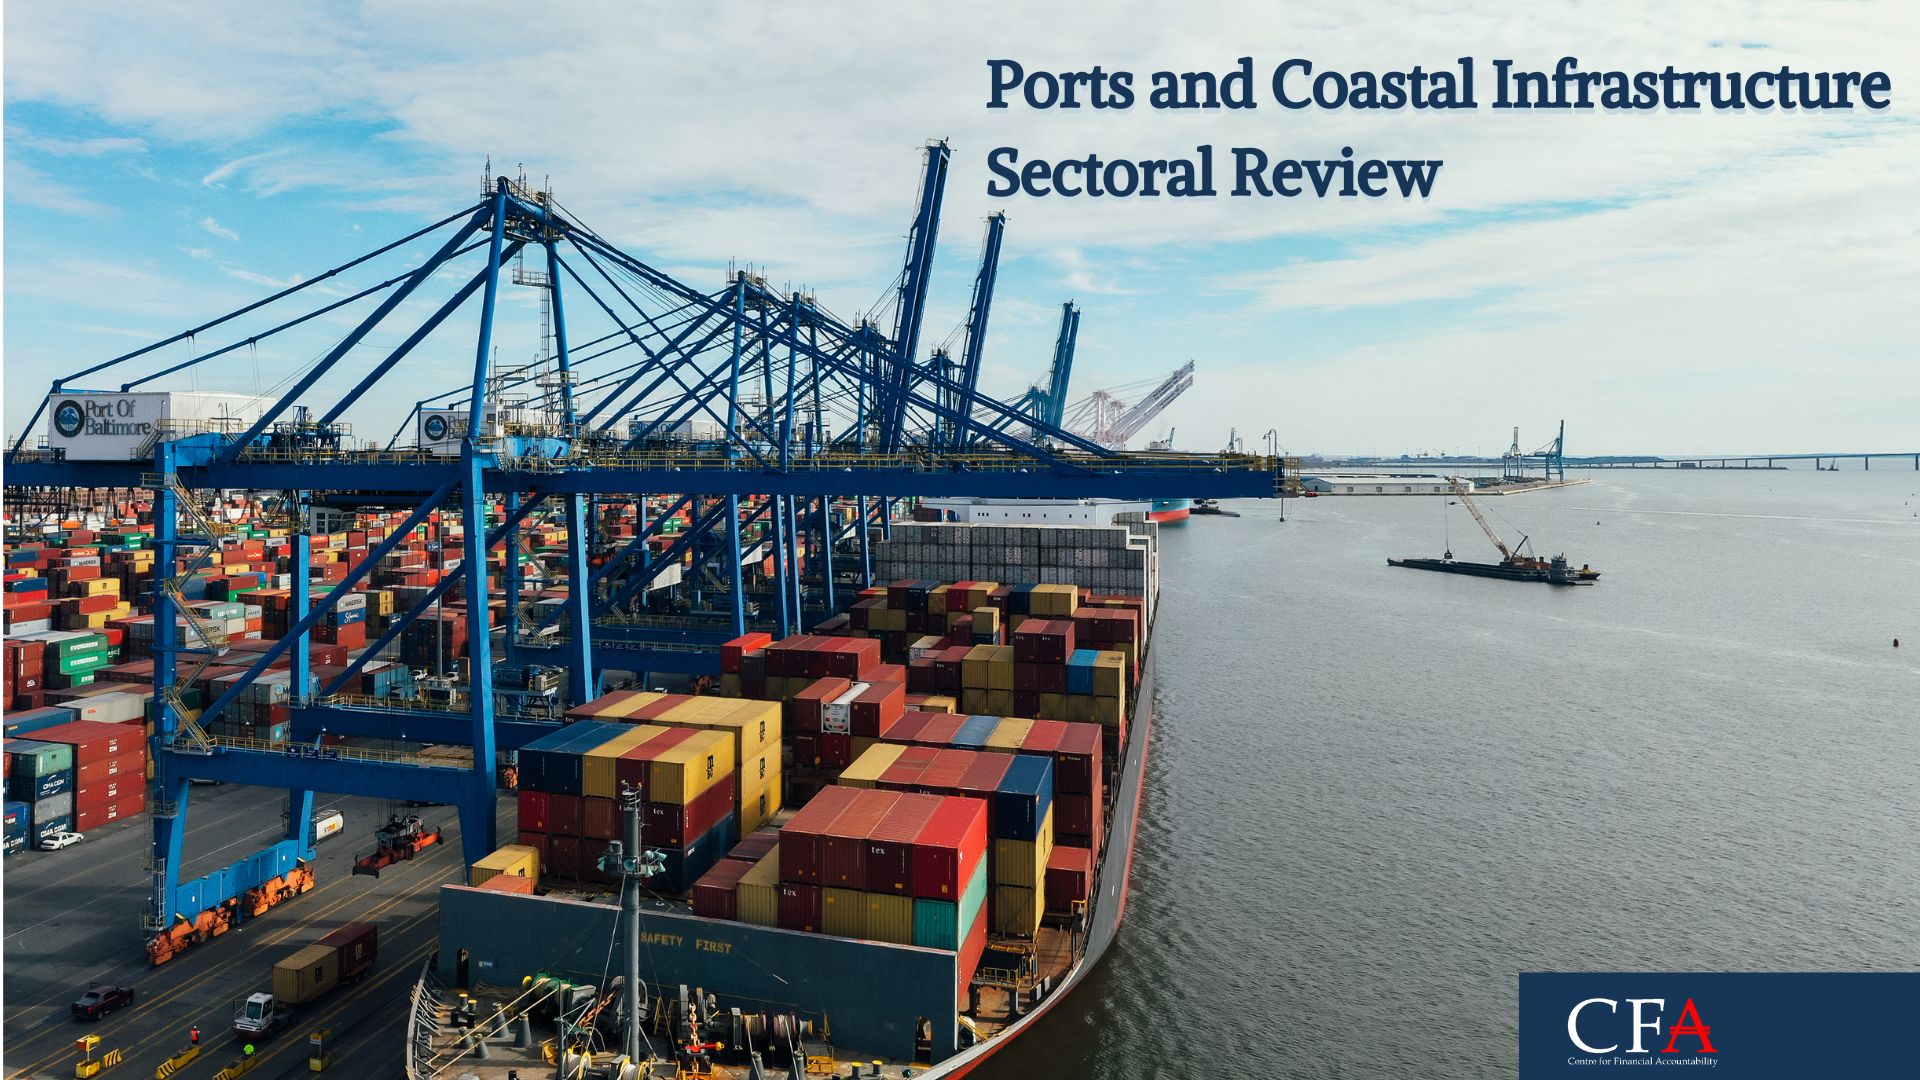 Ports and Coastal Infrastructure Sectoral Review